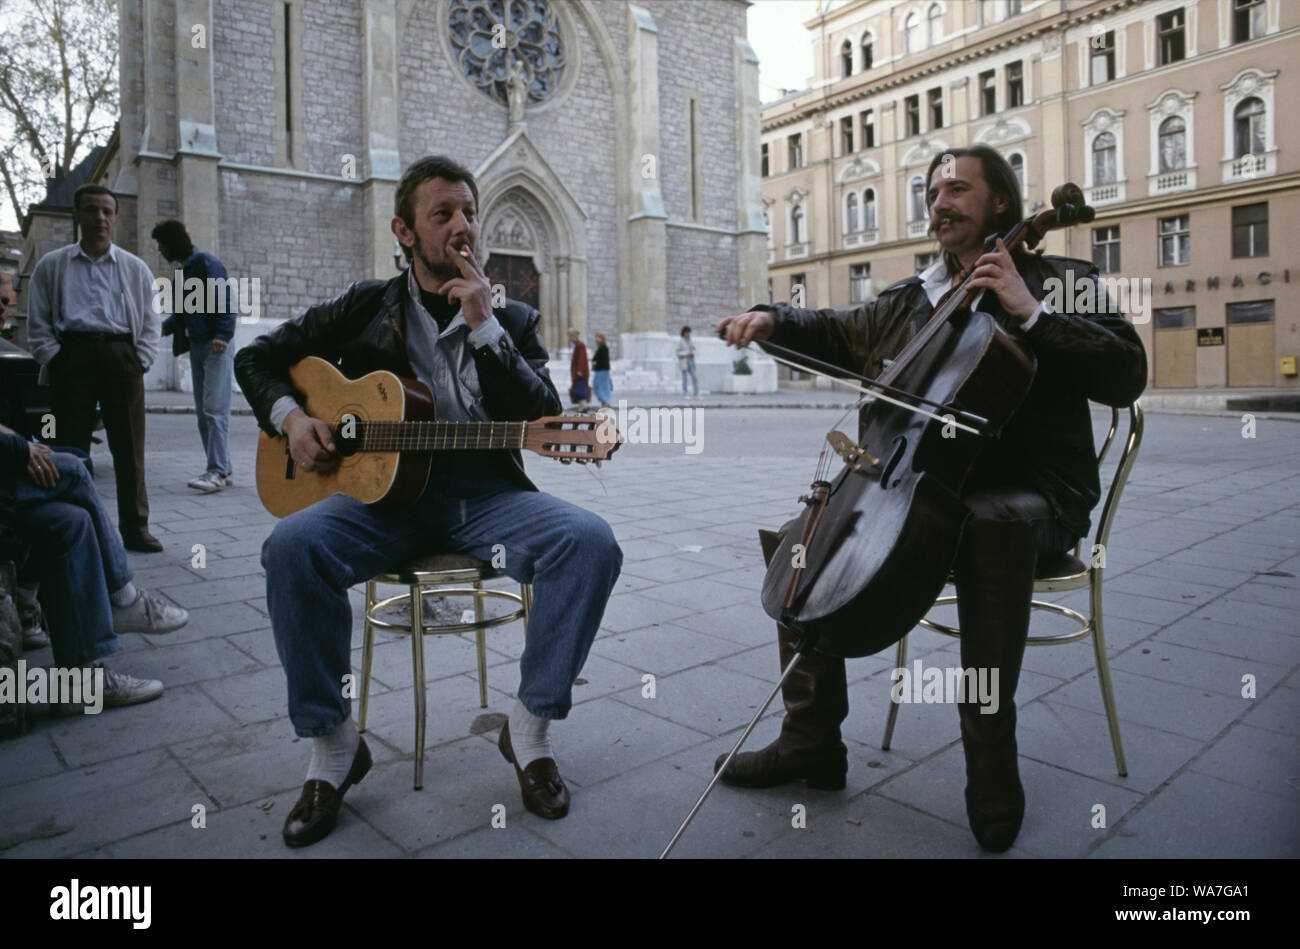 11th May 1993 During the Siege of Sarajevo: the 'cellist of Sarajevo', Vedran Smailović, performs with a guitar-playing friend in front of the Sacred Heart Cathedral. Stock Photo